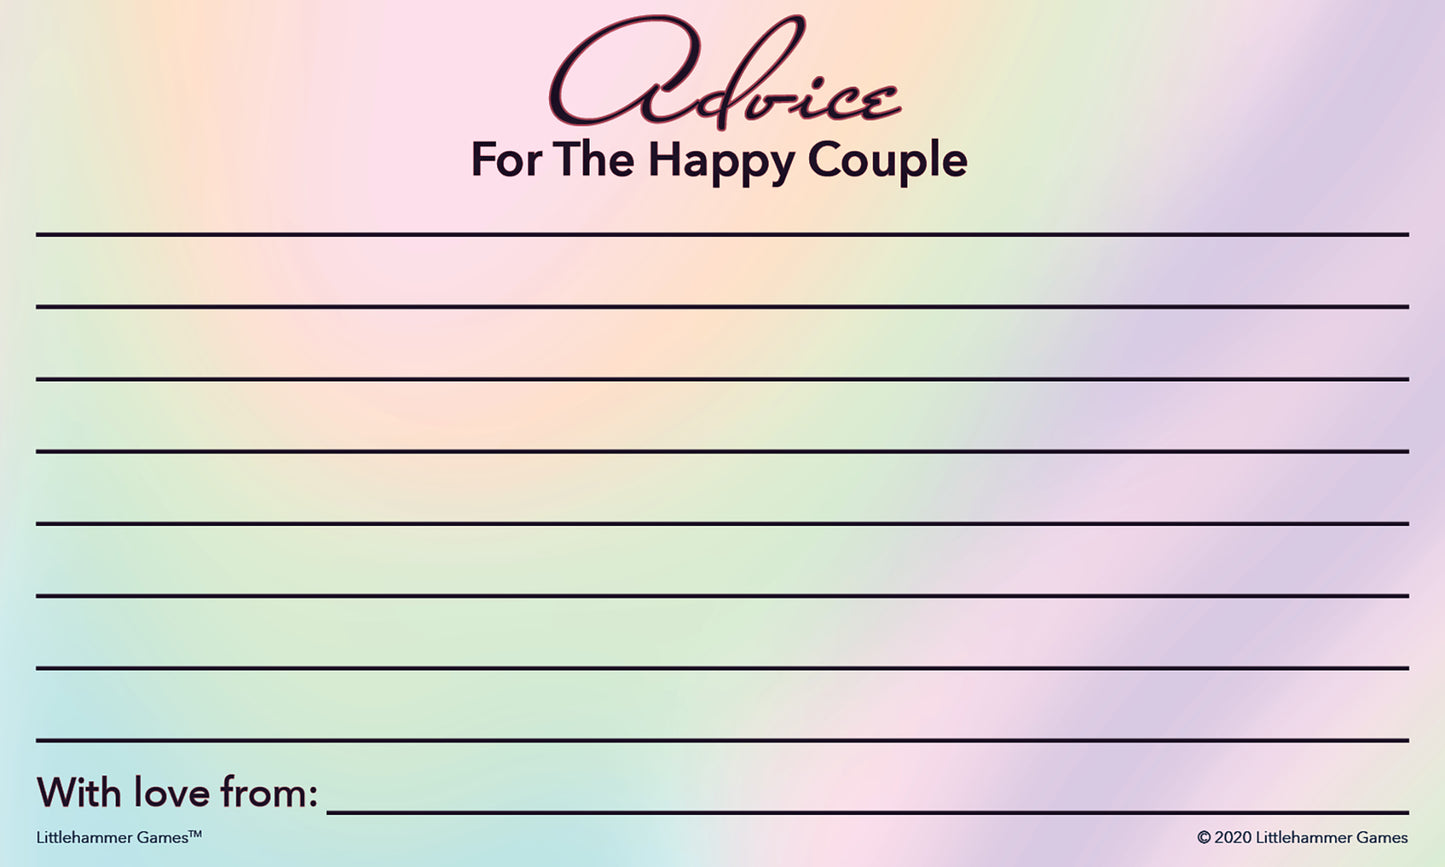 Hologram-themed Advice for the Happy Couple cards